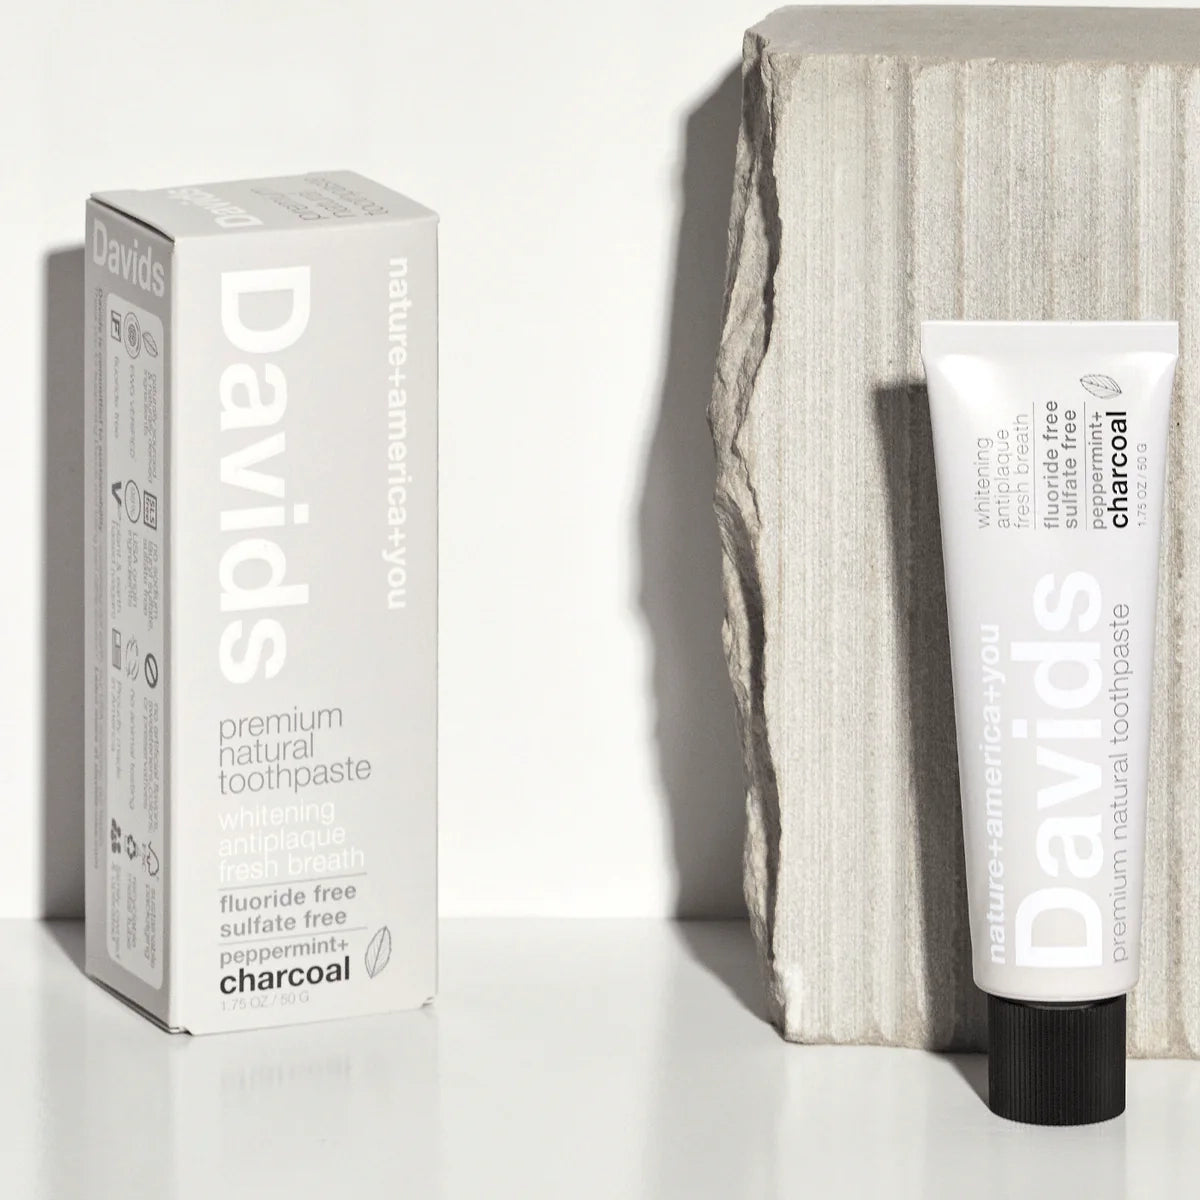 Davids Premium Toothpaste | Charcoal + Peppermint | Travel Size Davids Natural Toothpaste 